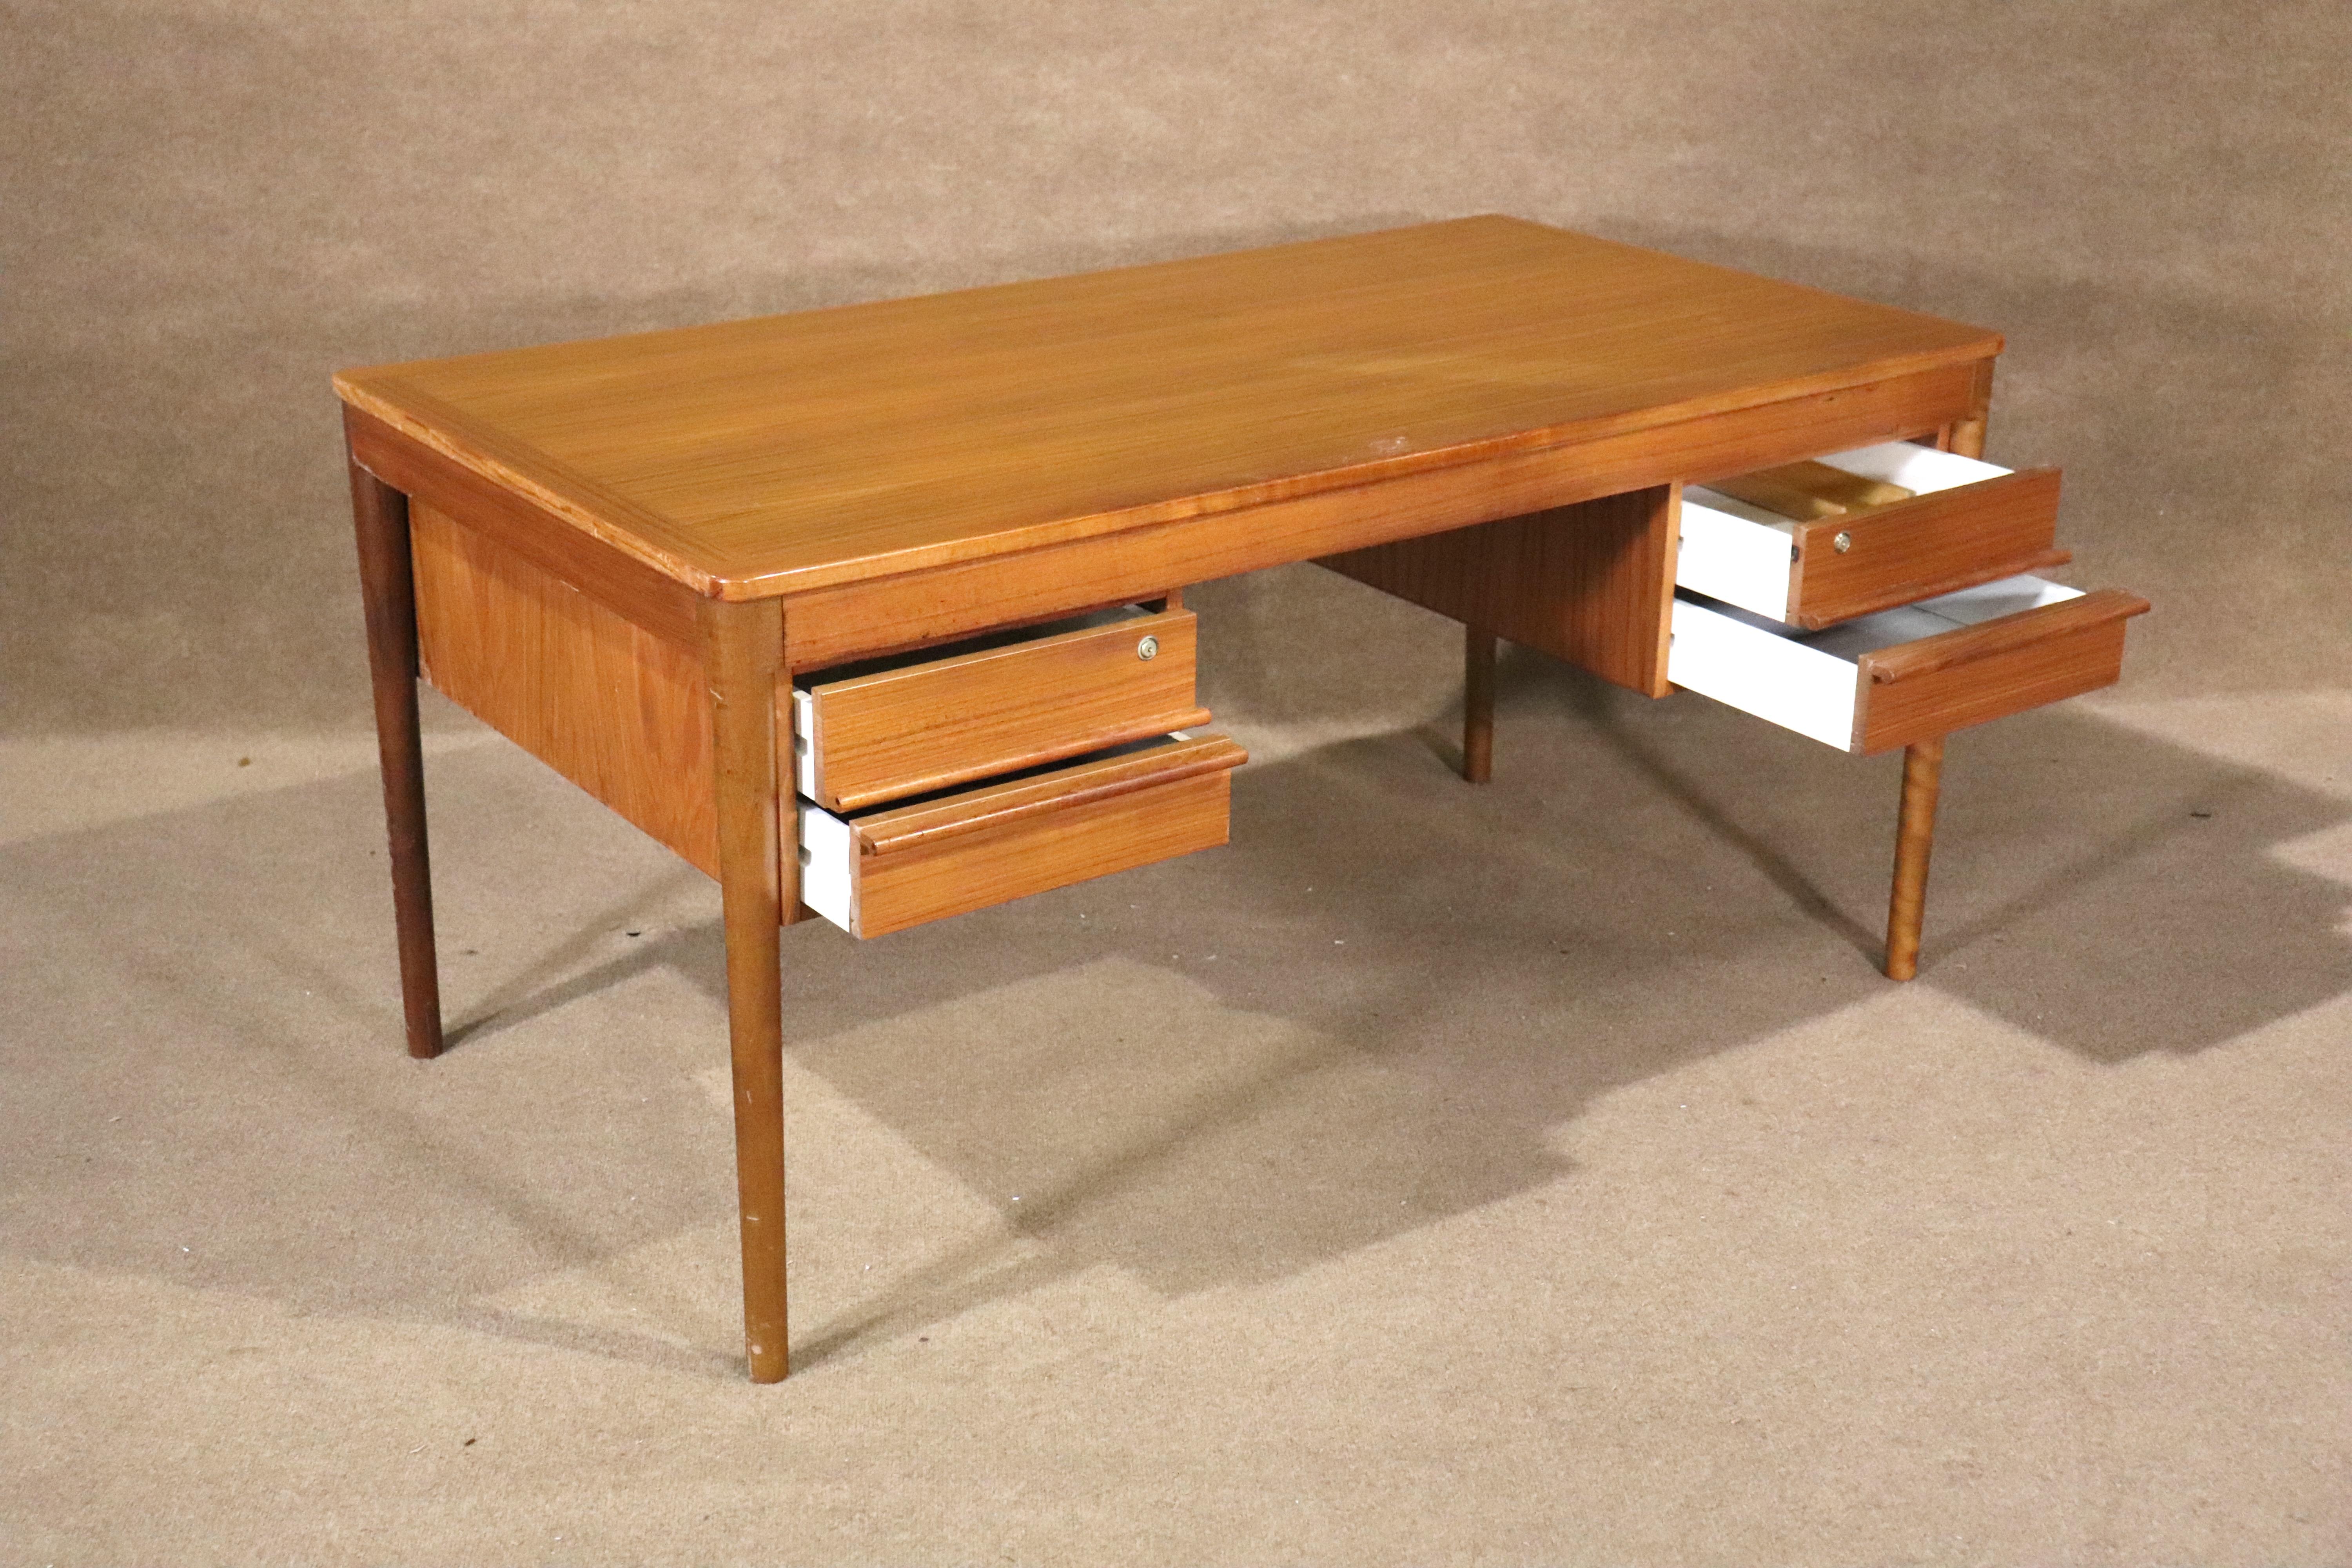 Danish made mid-century modern desk in teak wood grain. Four drawers and finished back.
Please confirm location NY or NJ